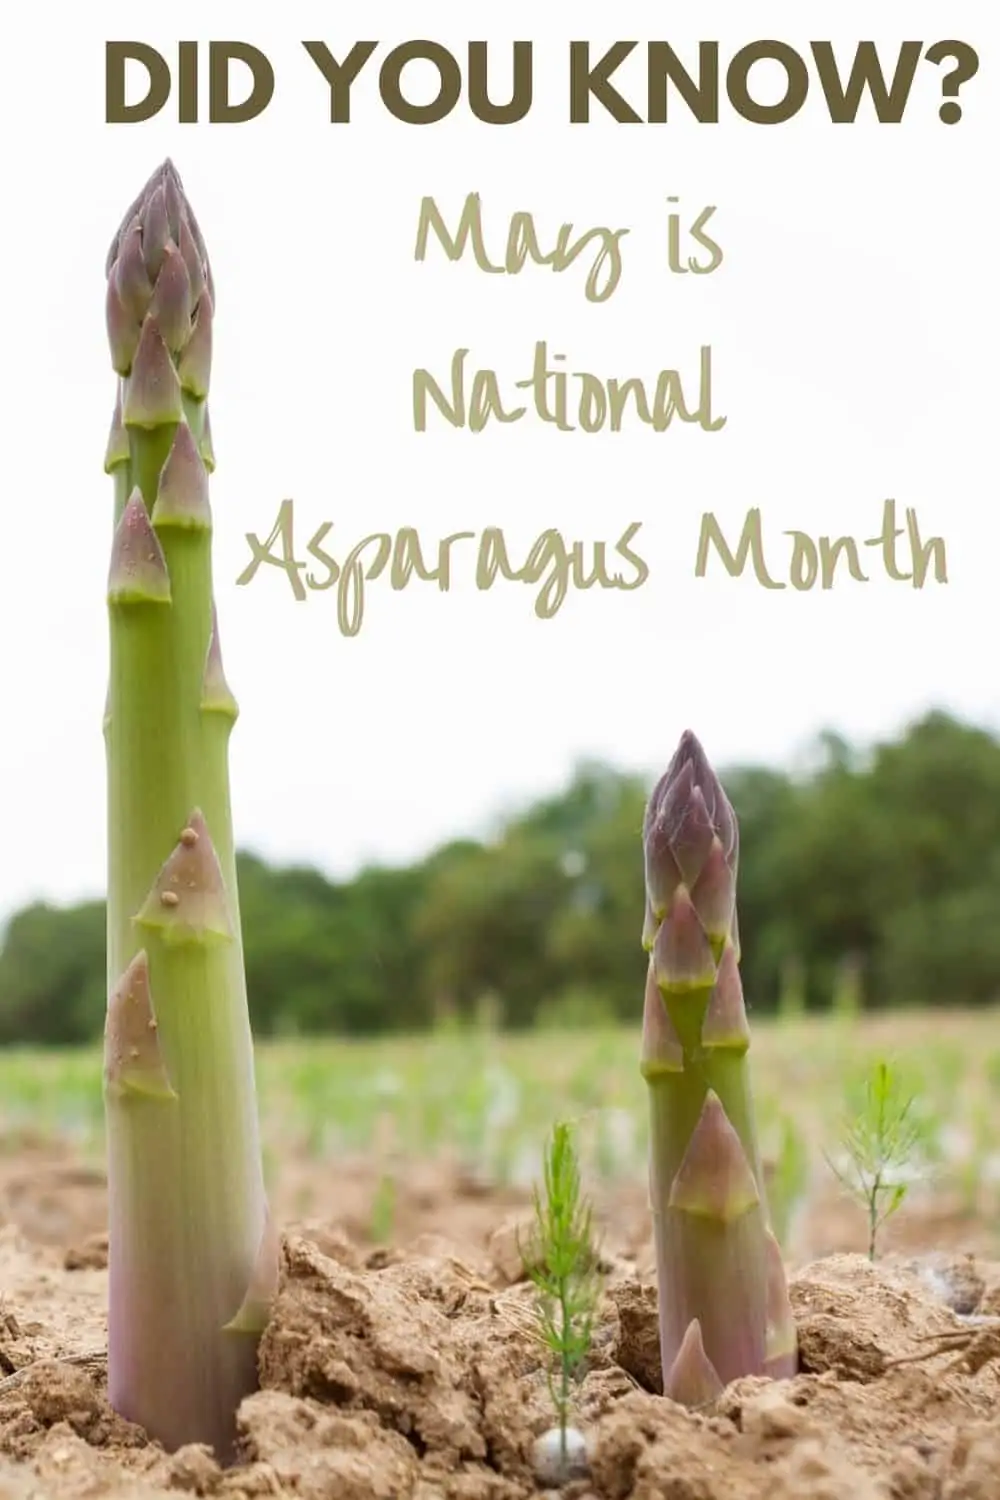 May is National Asparagus Month